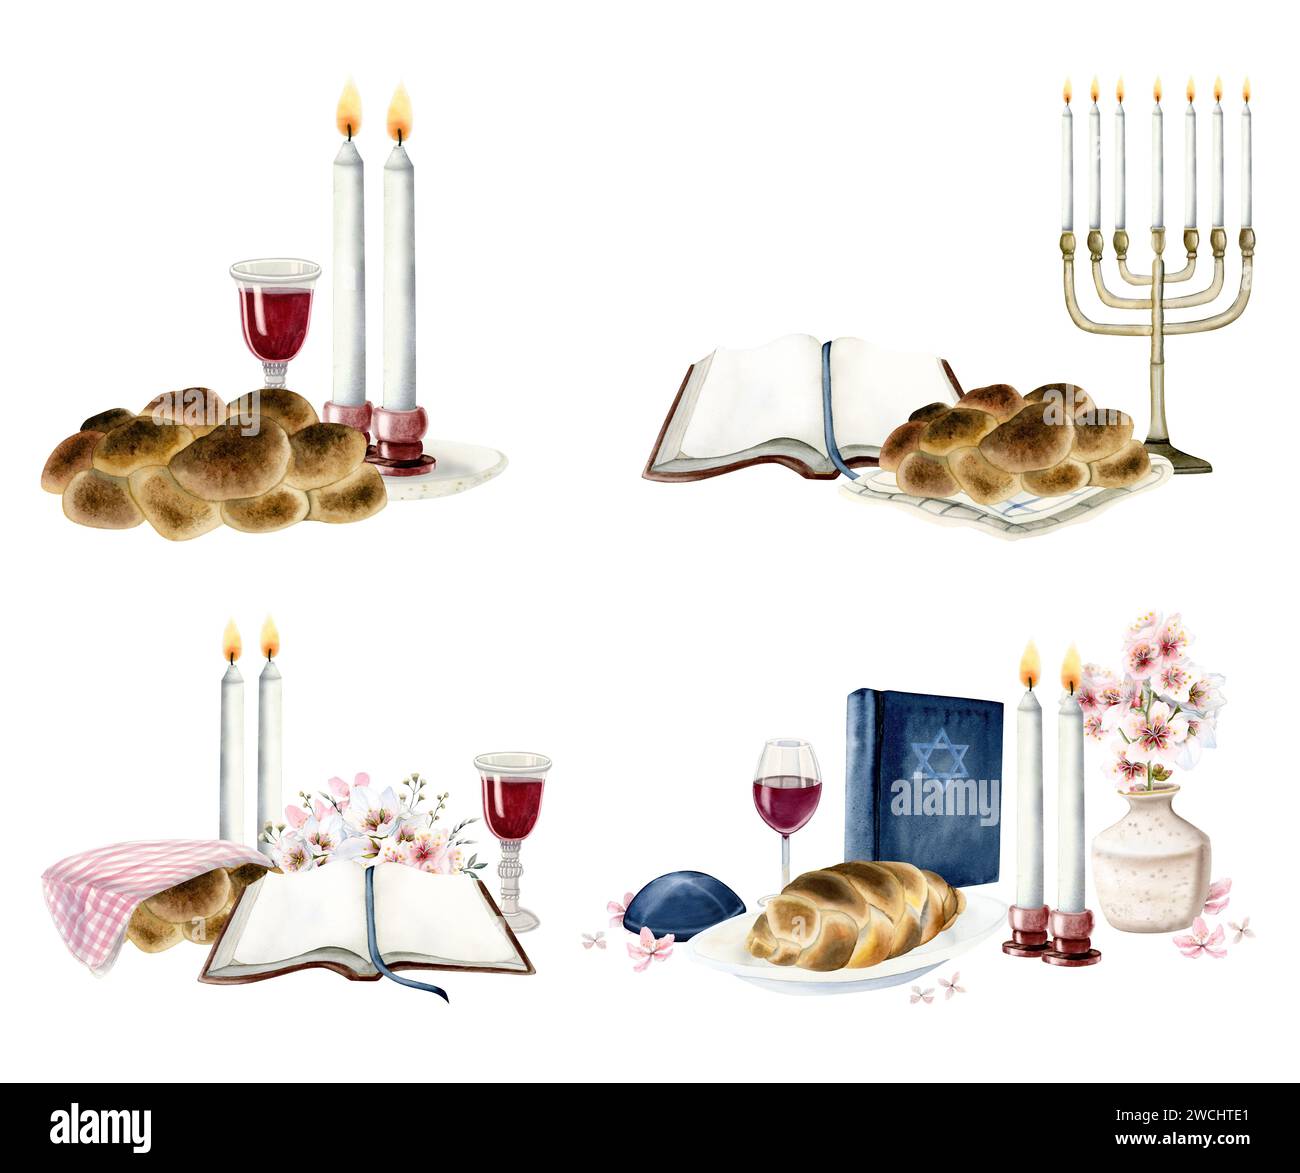 Shabbat ceremony scenes watercolor illustration set with Torah, star of David, candles, challah, red wine and menorah Stock Photo